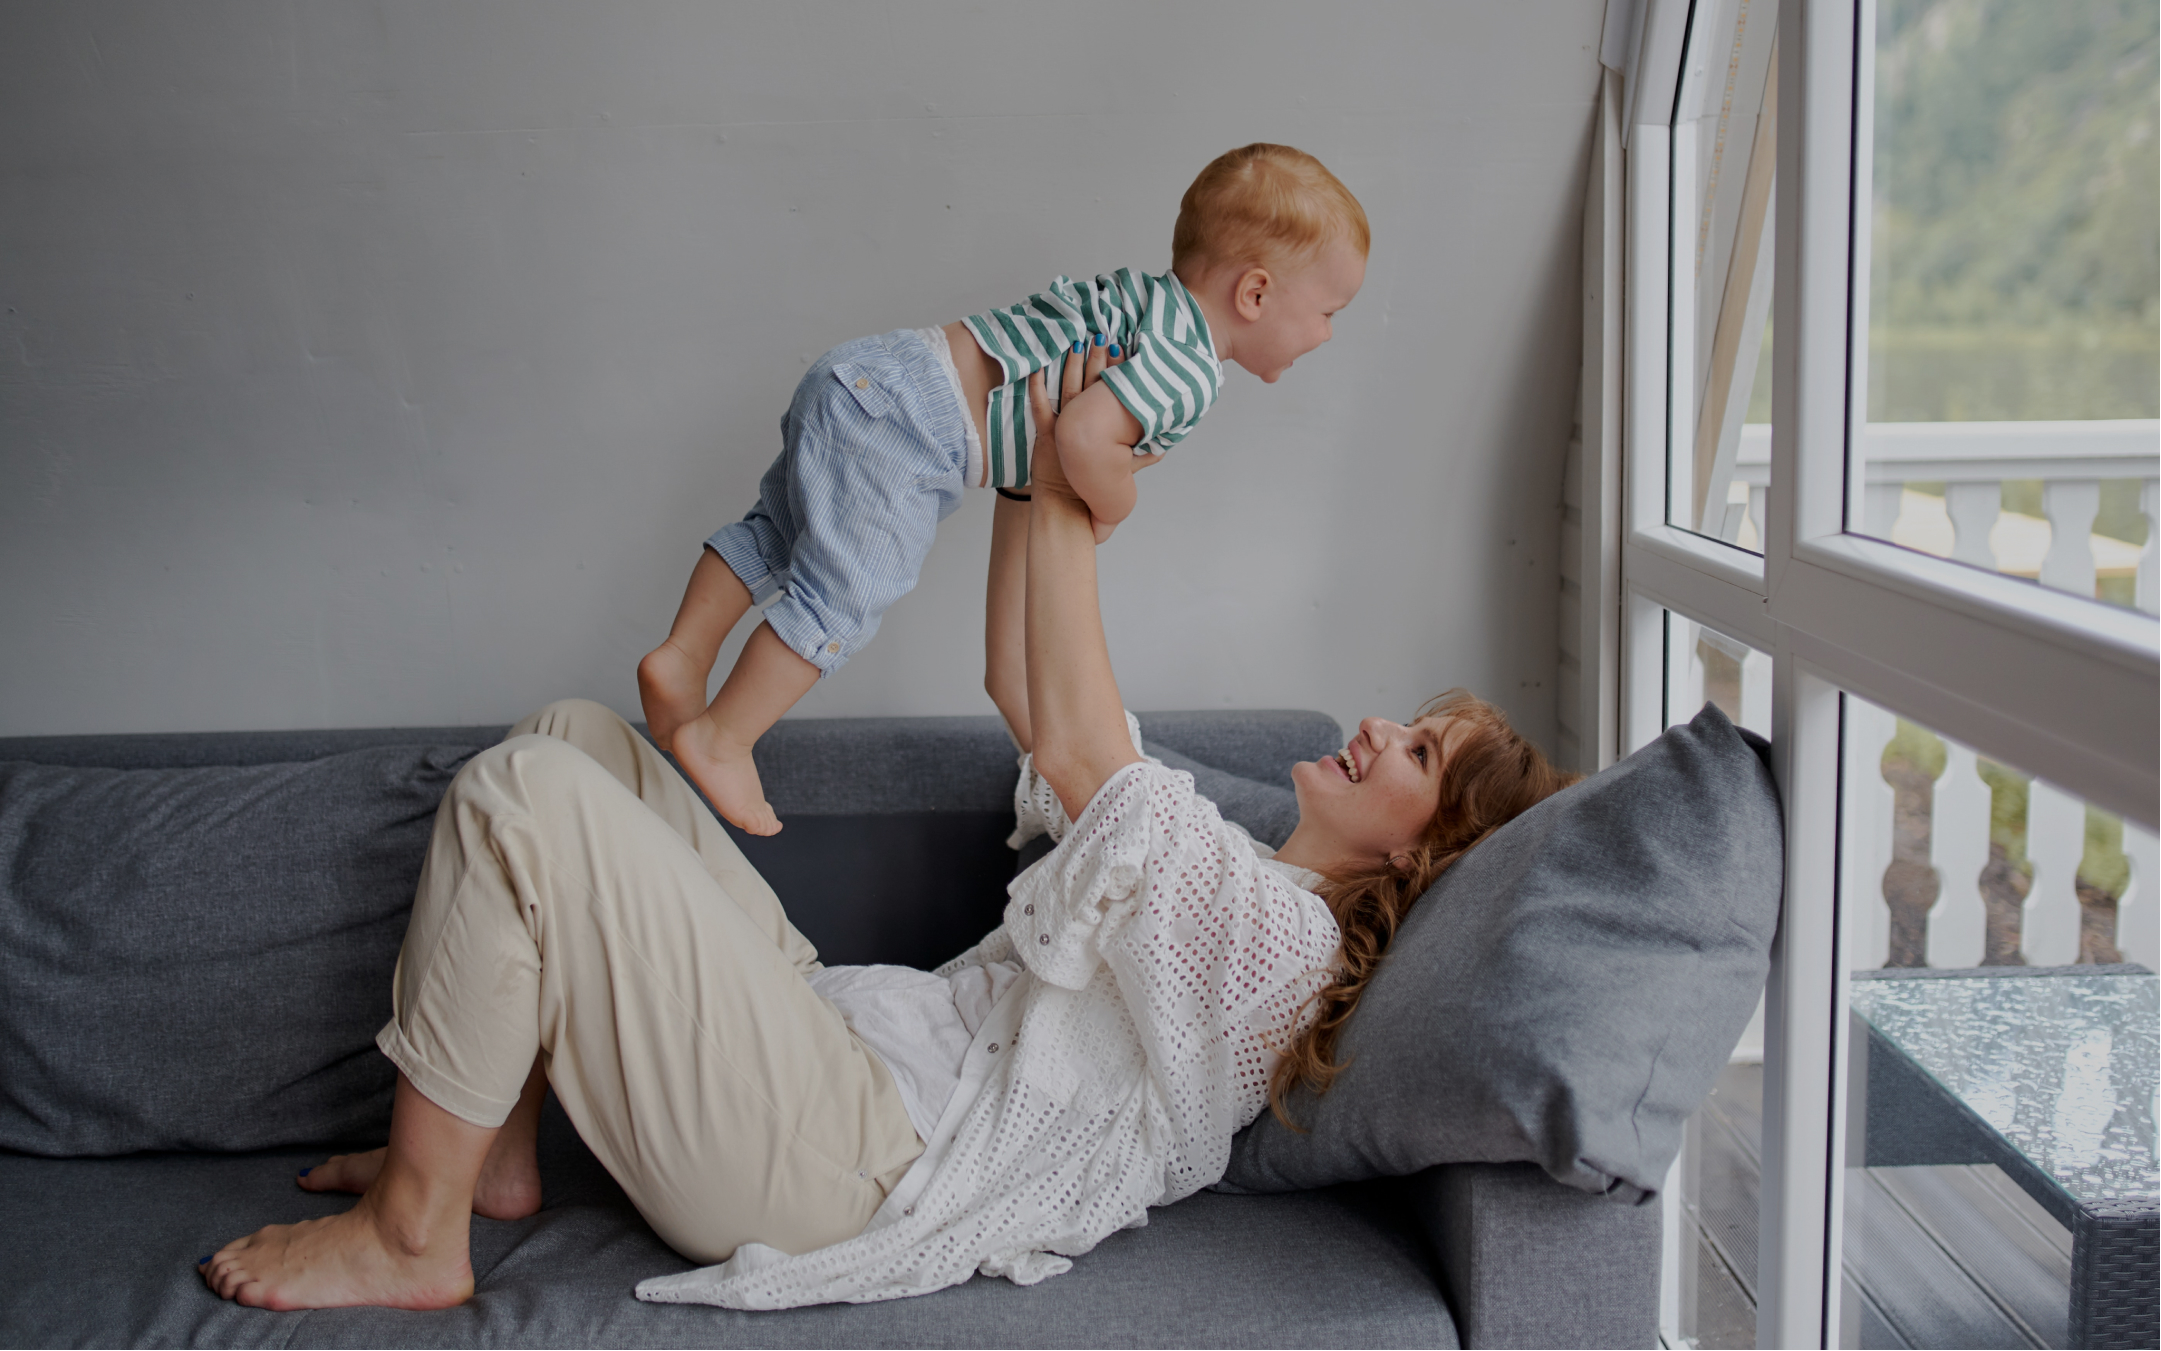 Mum laying on couch holding up baby